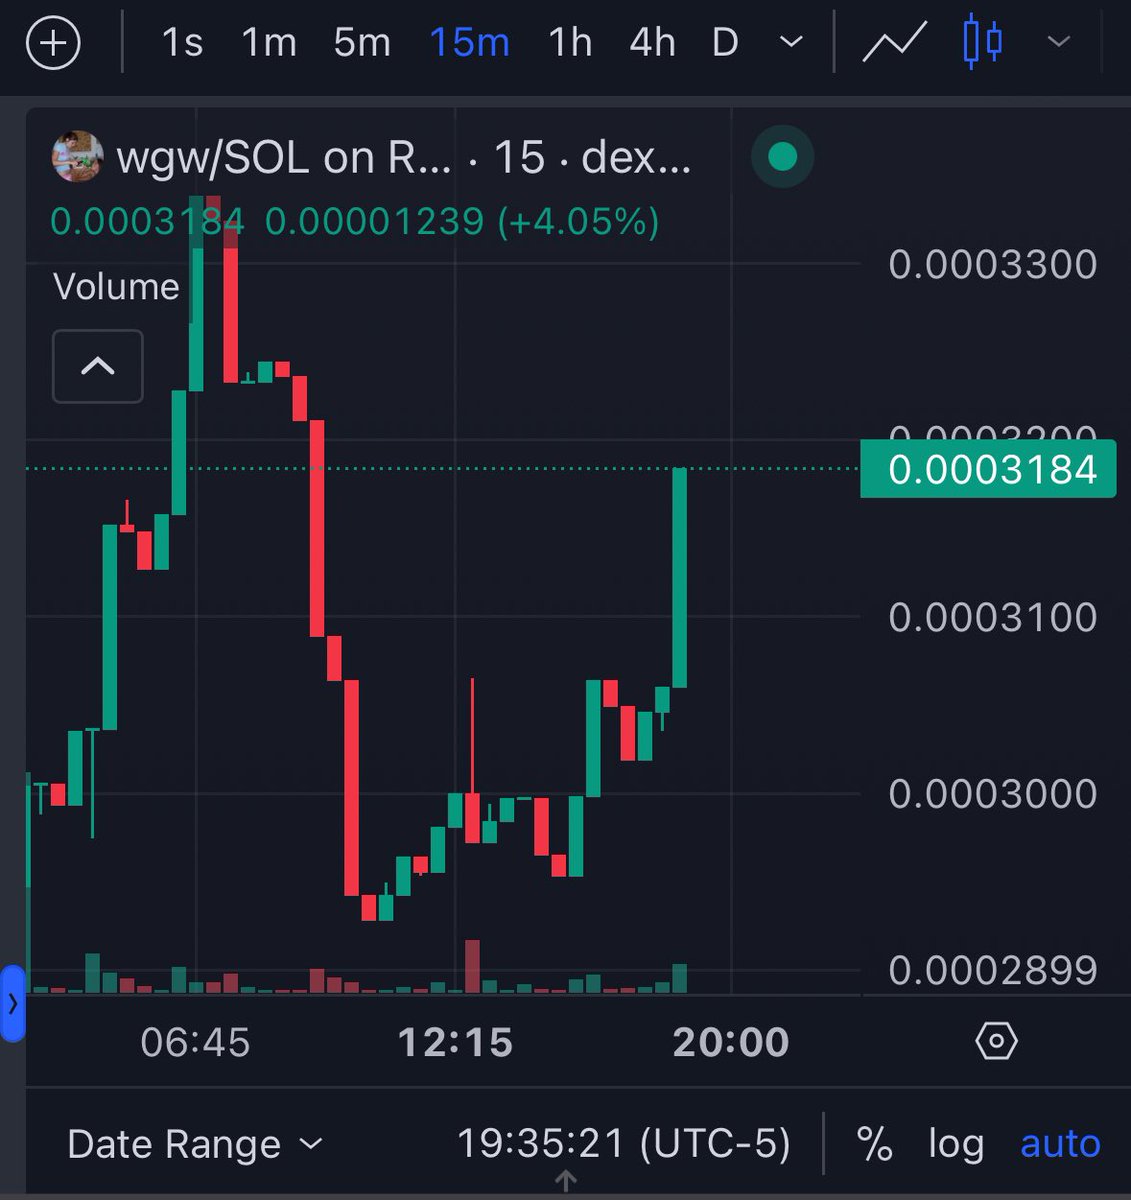 cooking quietly if u aren’t watching, id suggest you do so 👀💆🏼‍♀️🥂 $wgw gud bounce 2day, volume flowing back slowly. @WGWONSOL All Summer ☀️💅🏻